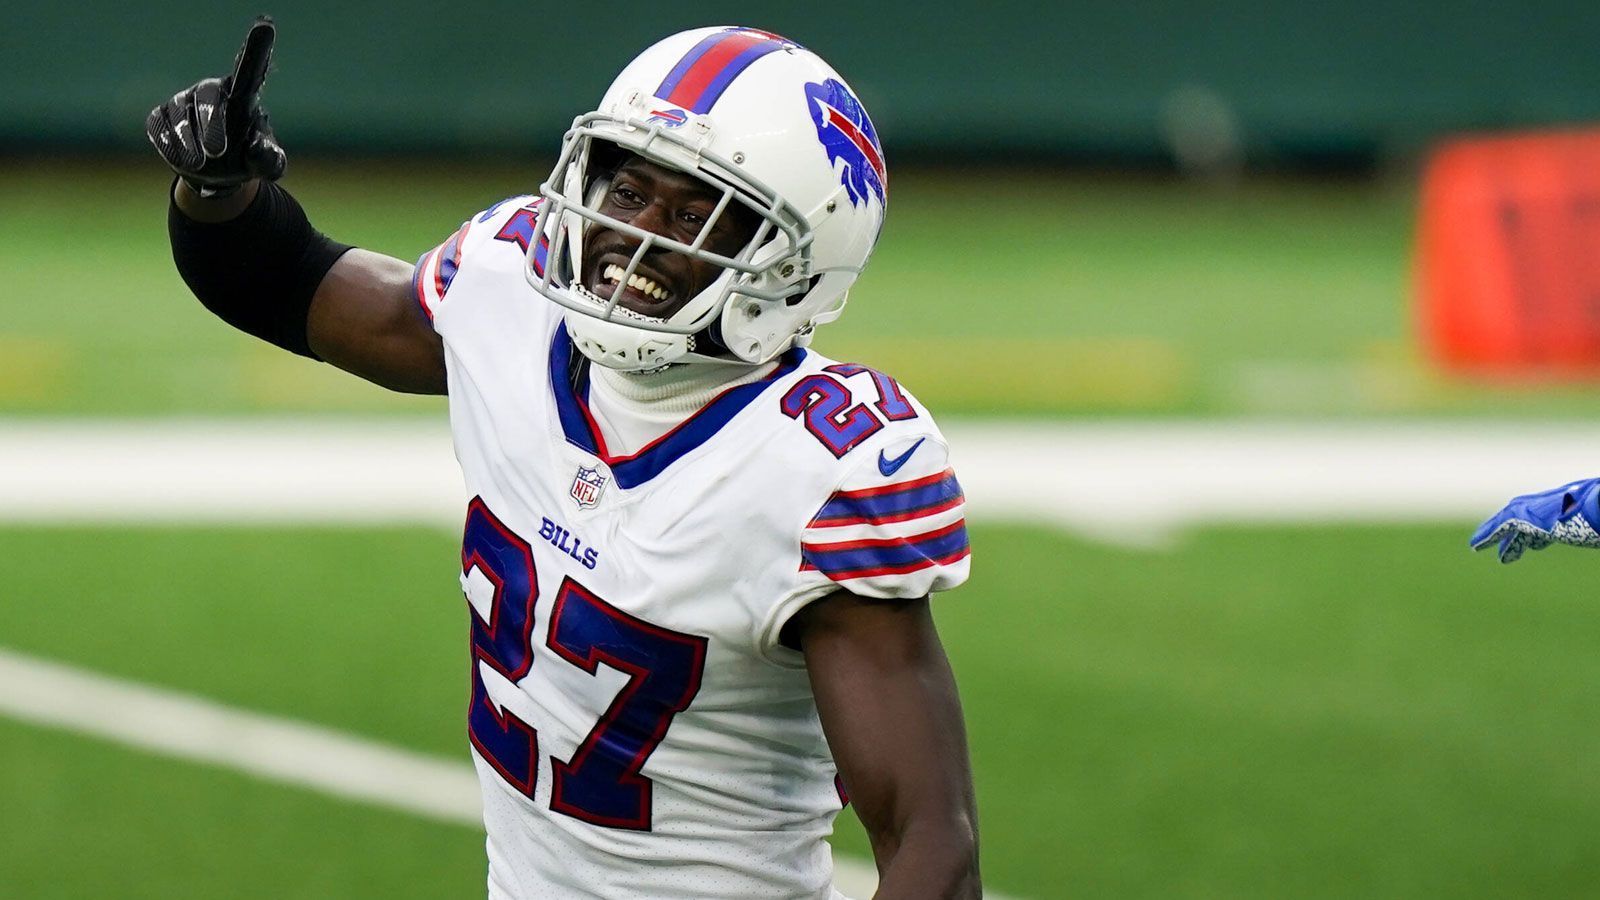 
                <strong>Platz 3: Tre'Davious White</strong><br>
                &#x2022; Team: Buffalo Bills<br>&#x2022; <strong>Overall Rating: 93</strong><br>&#x2022; Key Stats: Acceleration: 94 – Awareness: 96 – Stamina: 93<br>
              